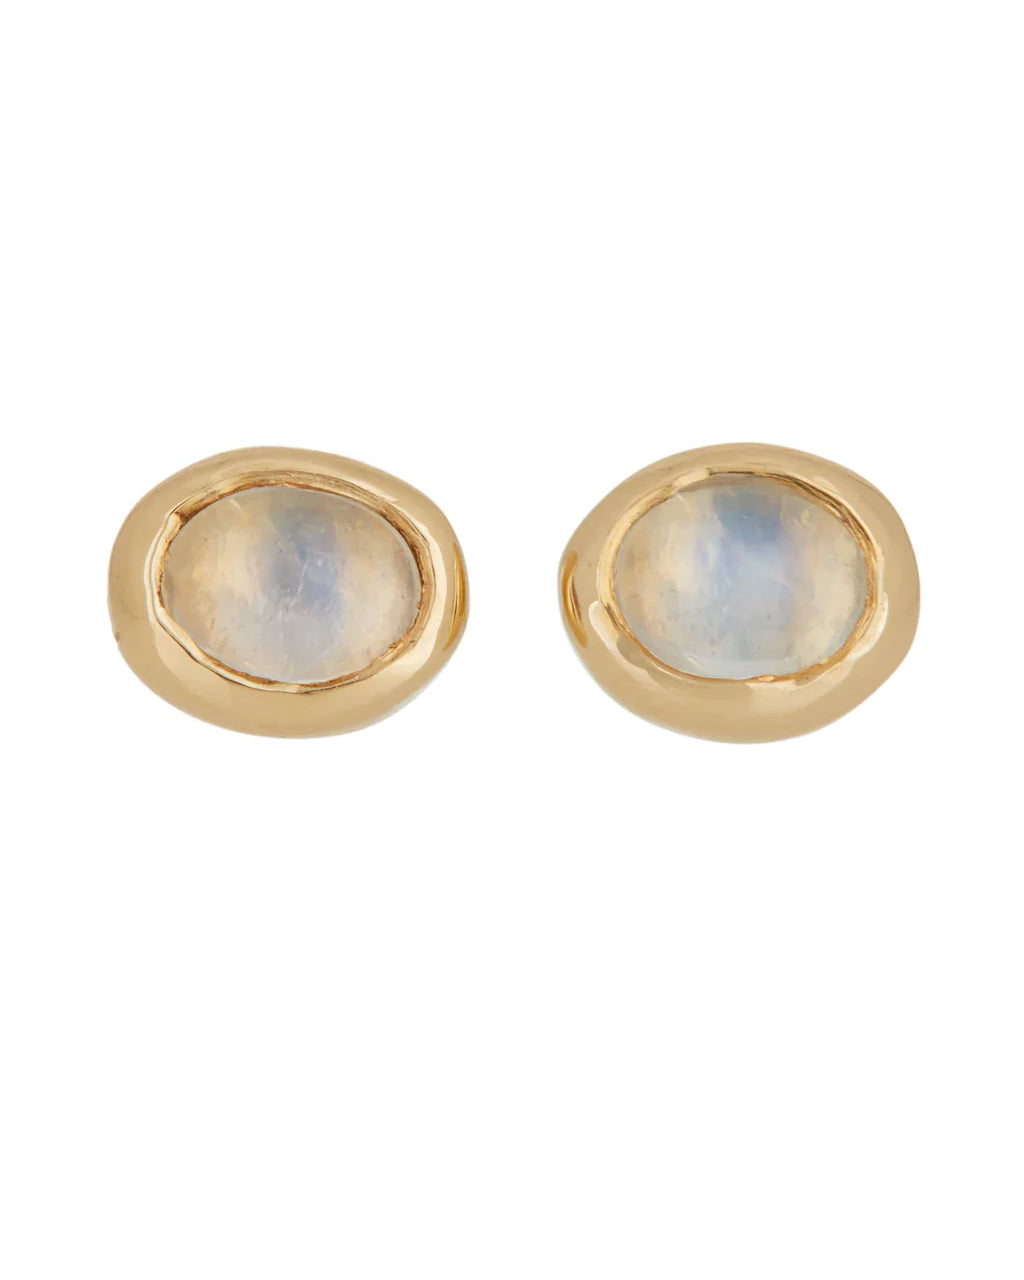 Pair of earrings in 14k yellow gold with moonstone cabochons.